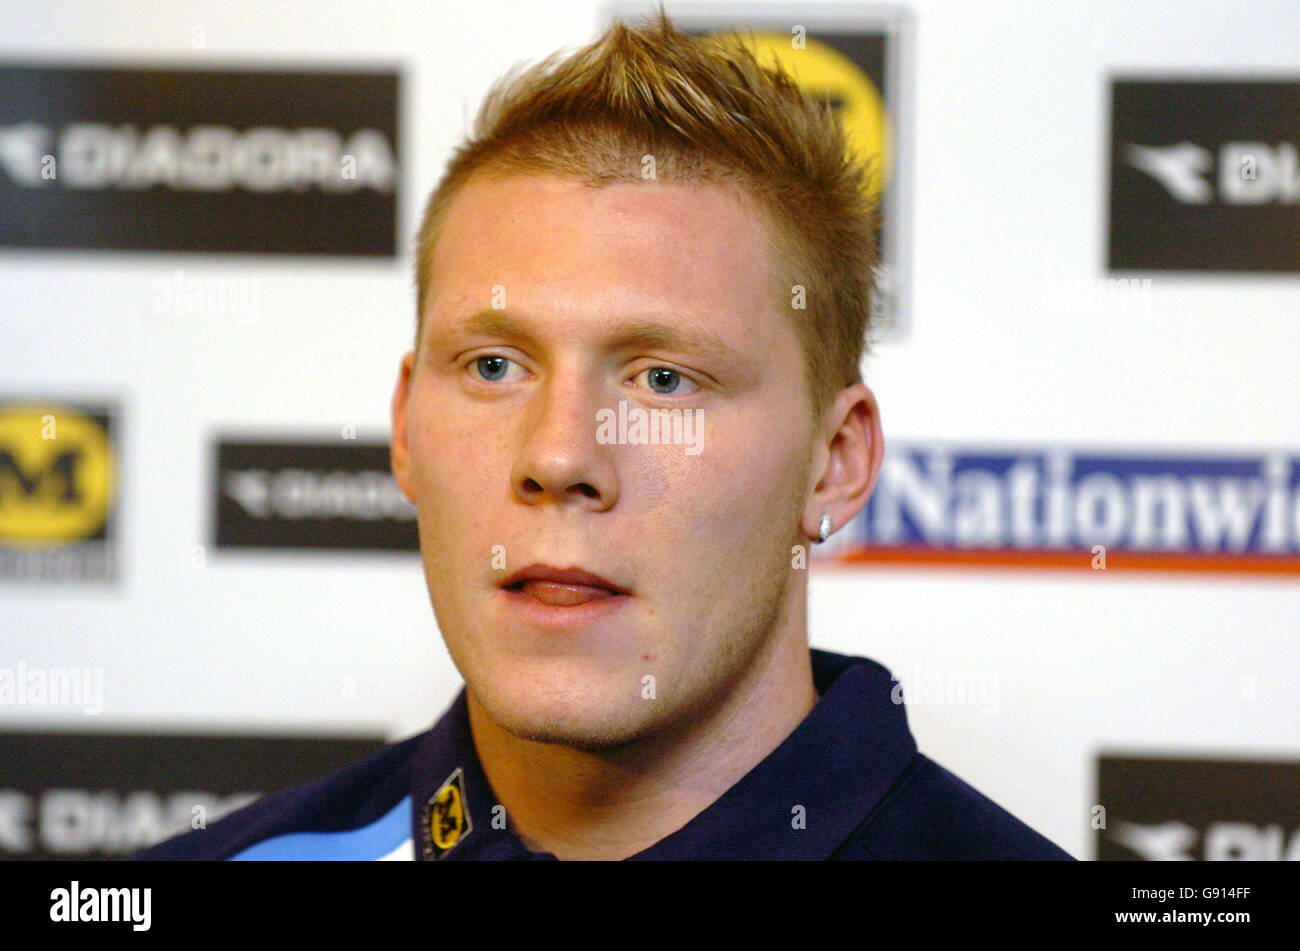 Scotland's Garry O'Connor speaks during a press conference at Cameron House Hotel, Loch Lomond, Thursday November 10, 2005, ahead of their International Friendly against the USA at Hampden Park on Saturday. PRESS ASSOCIATION Photo. Photo credit should read: Danny Lawson/PA. Stock Photo